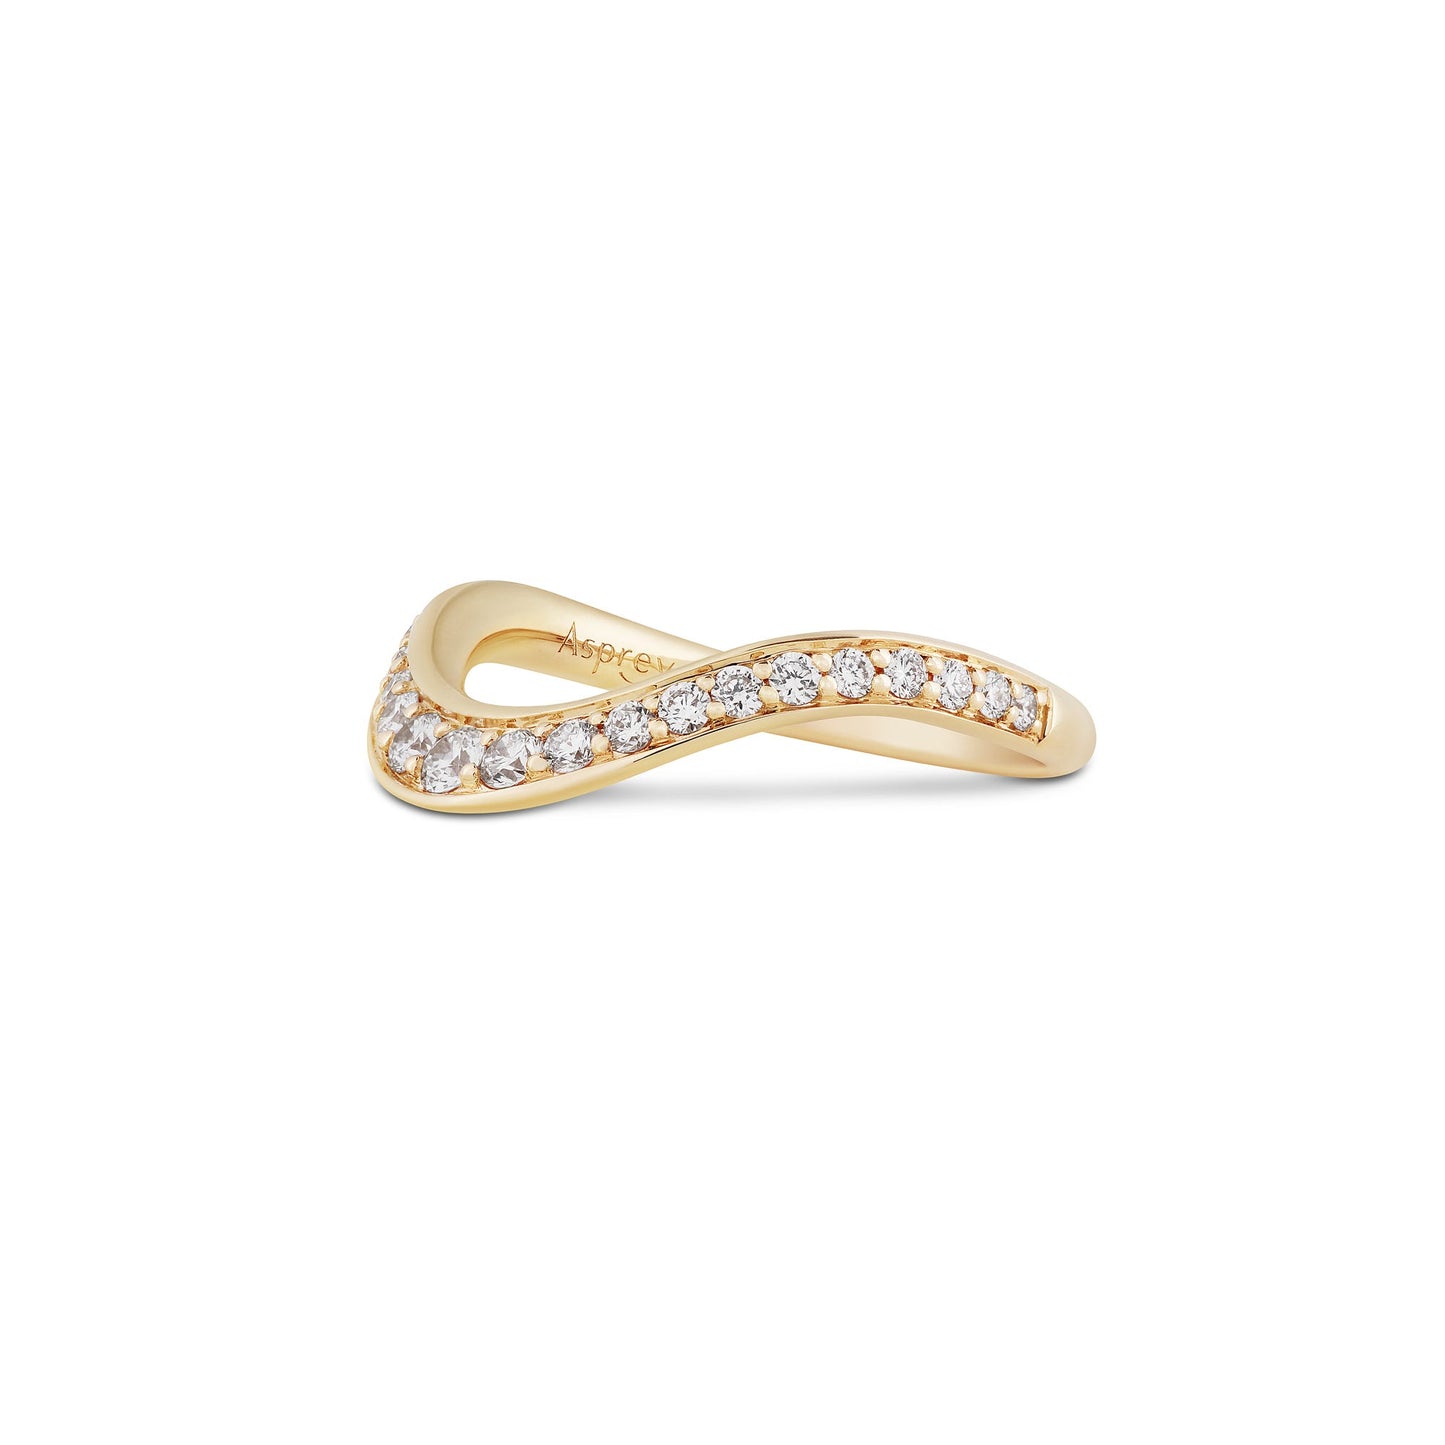 Chevron Stack Ring in 18ct Yellow Gold with Diamonds